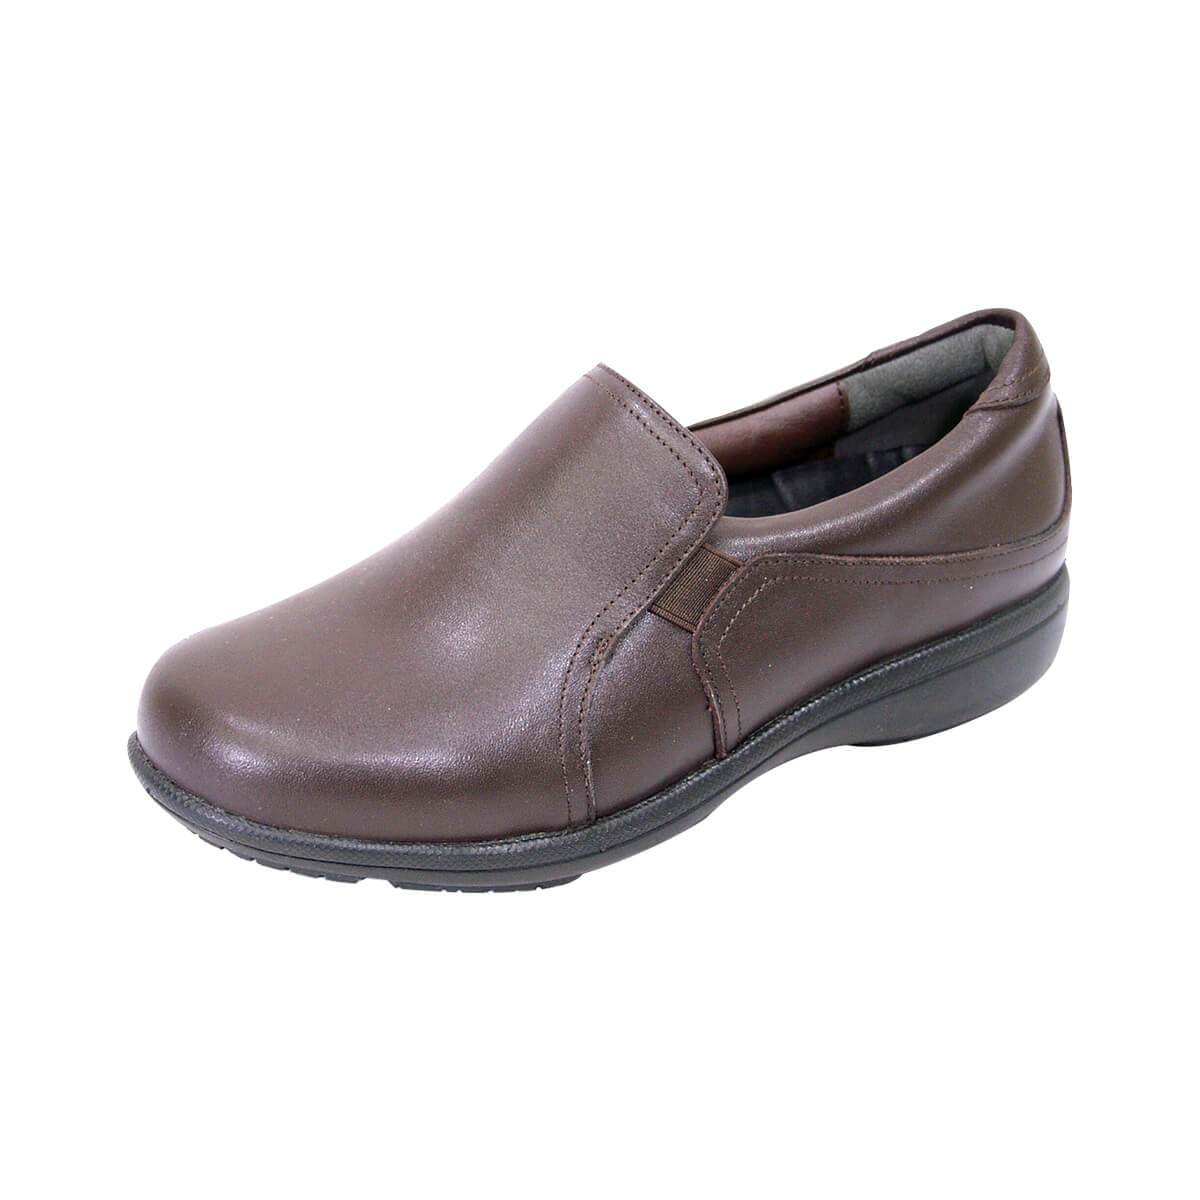 PEERAGE Therese Women's Wide Width Leather Loafers